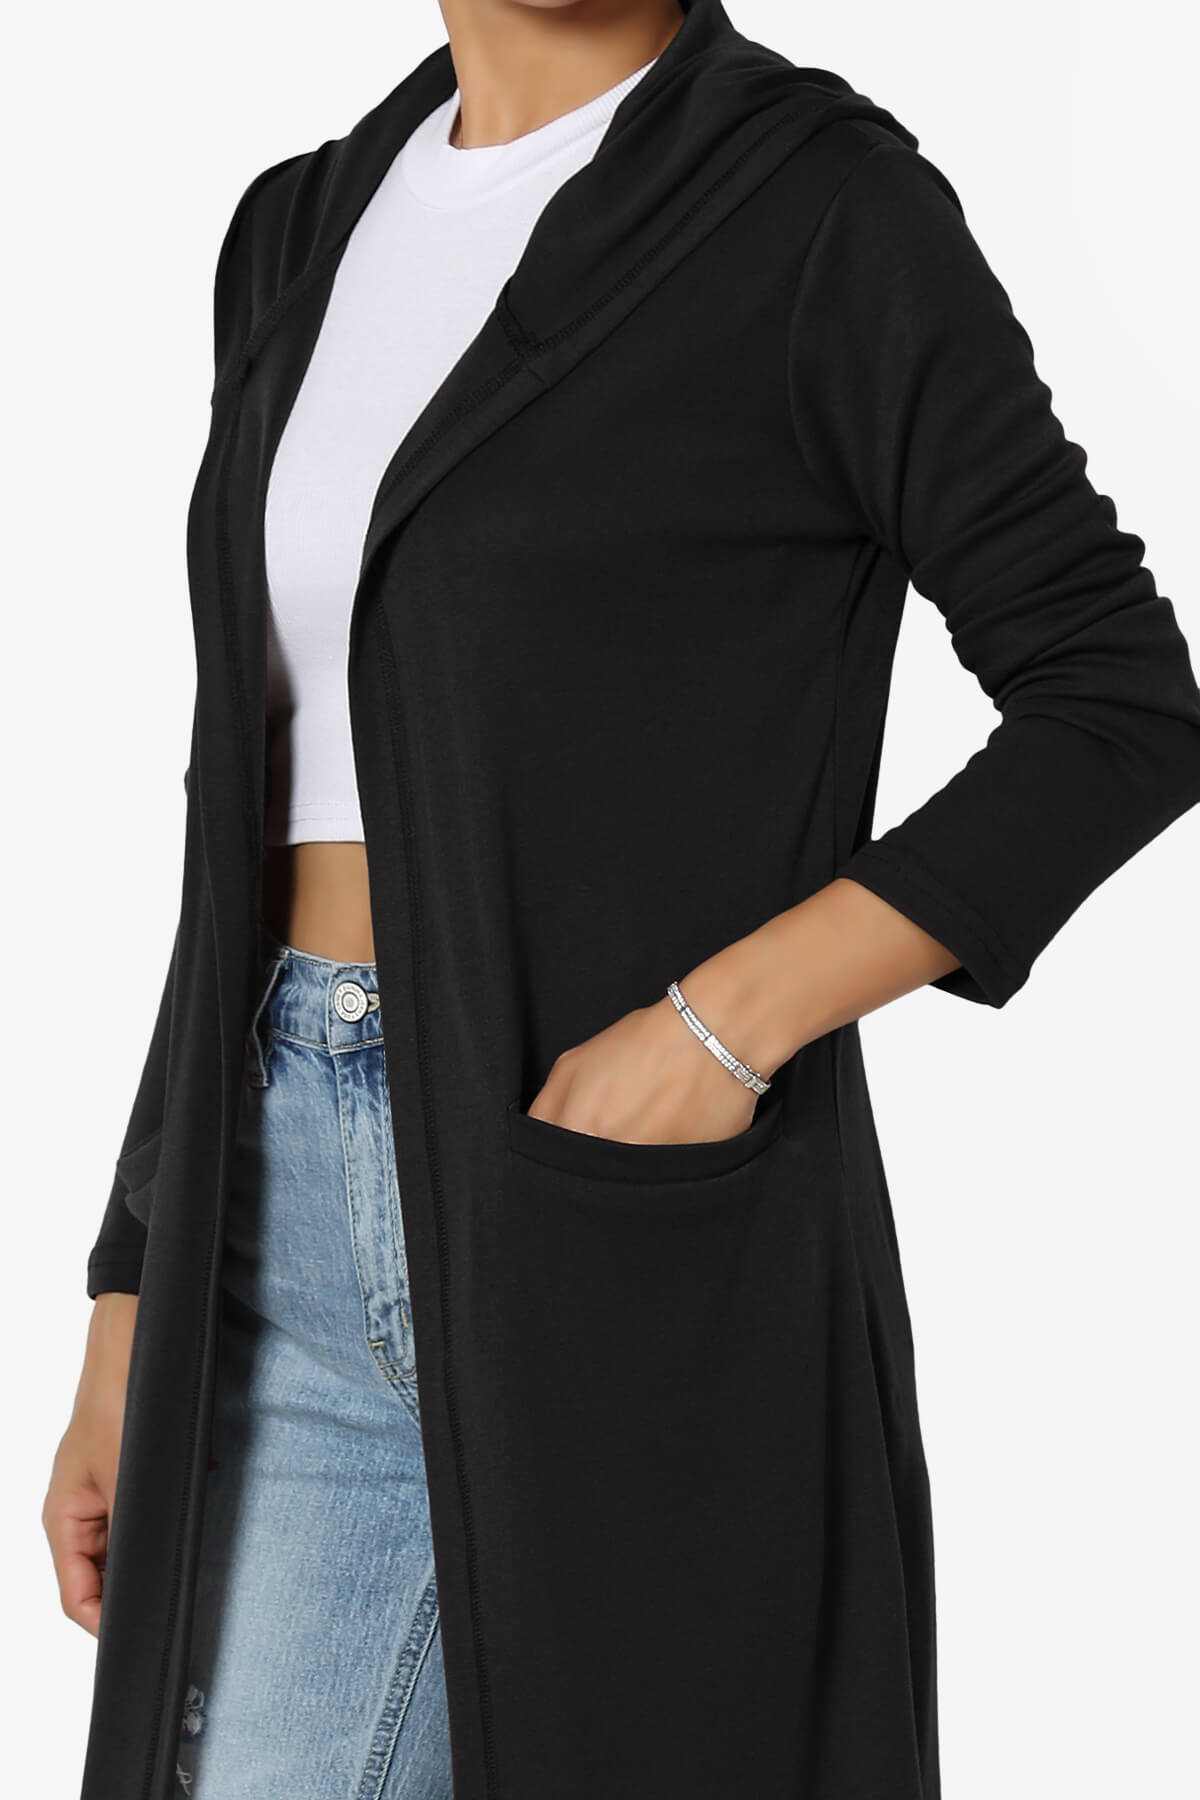 Load image into Gallery viewer, Nataly Open Front Hooded Long Cardigan BLACK_5
